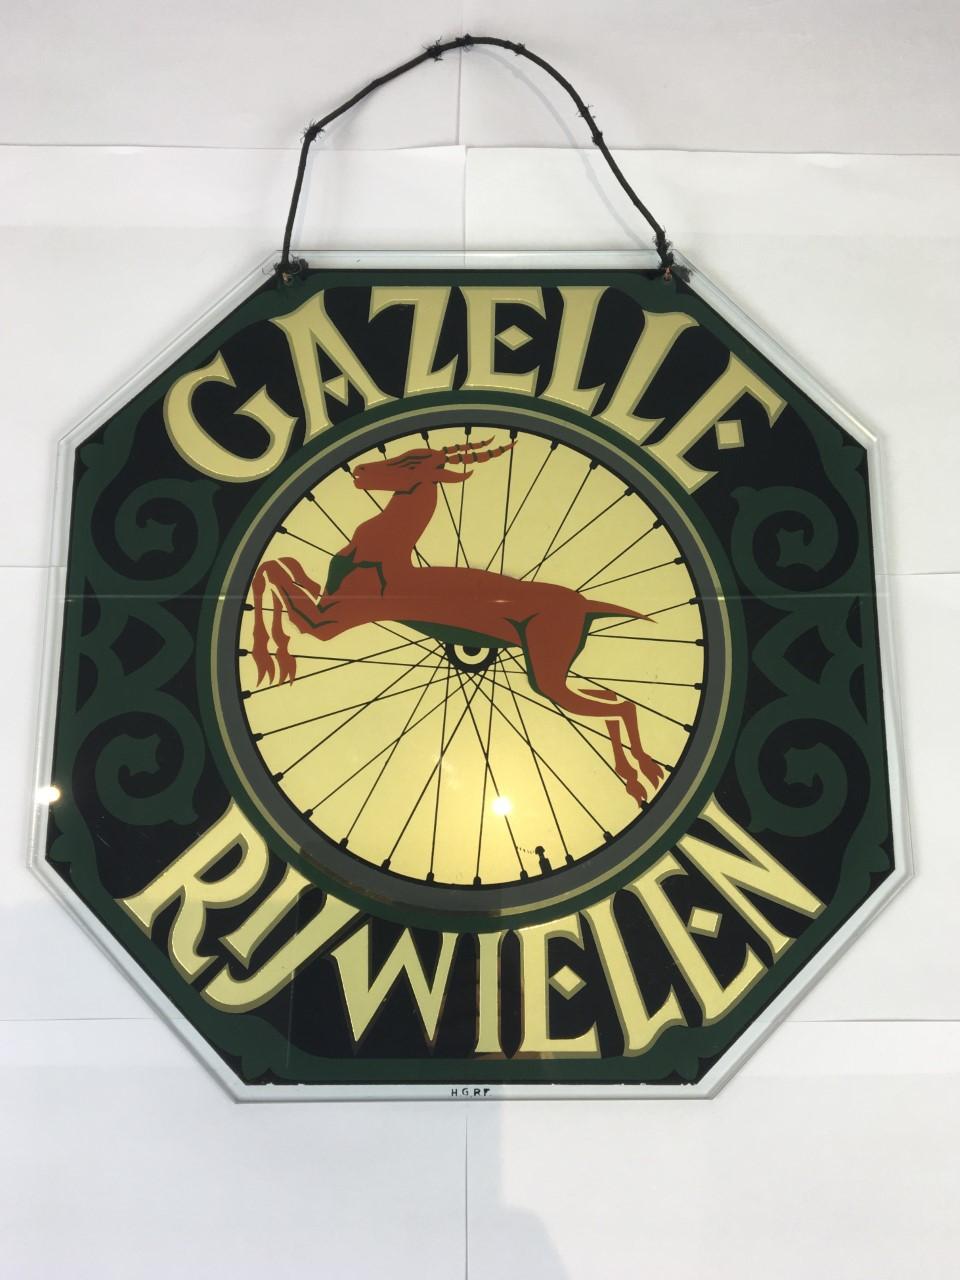 Old glass advertising sign for Gazelle Bicycles, a bicycle factory in the Netherlands since 1892. This Art Deco publicity sign is made of glass - advertising behind glass. 
Beautifull green with black design, golden lettering with in the middle a